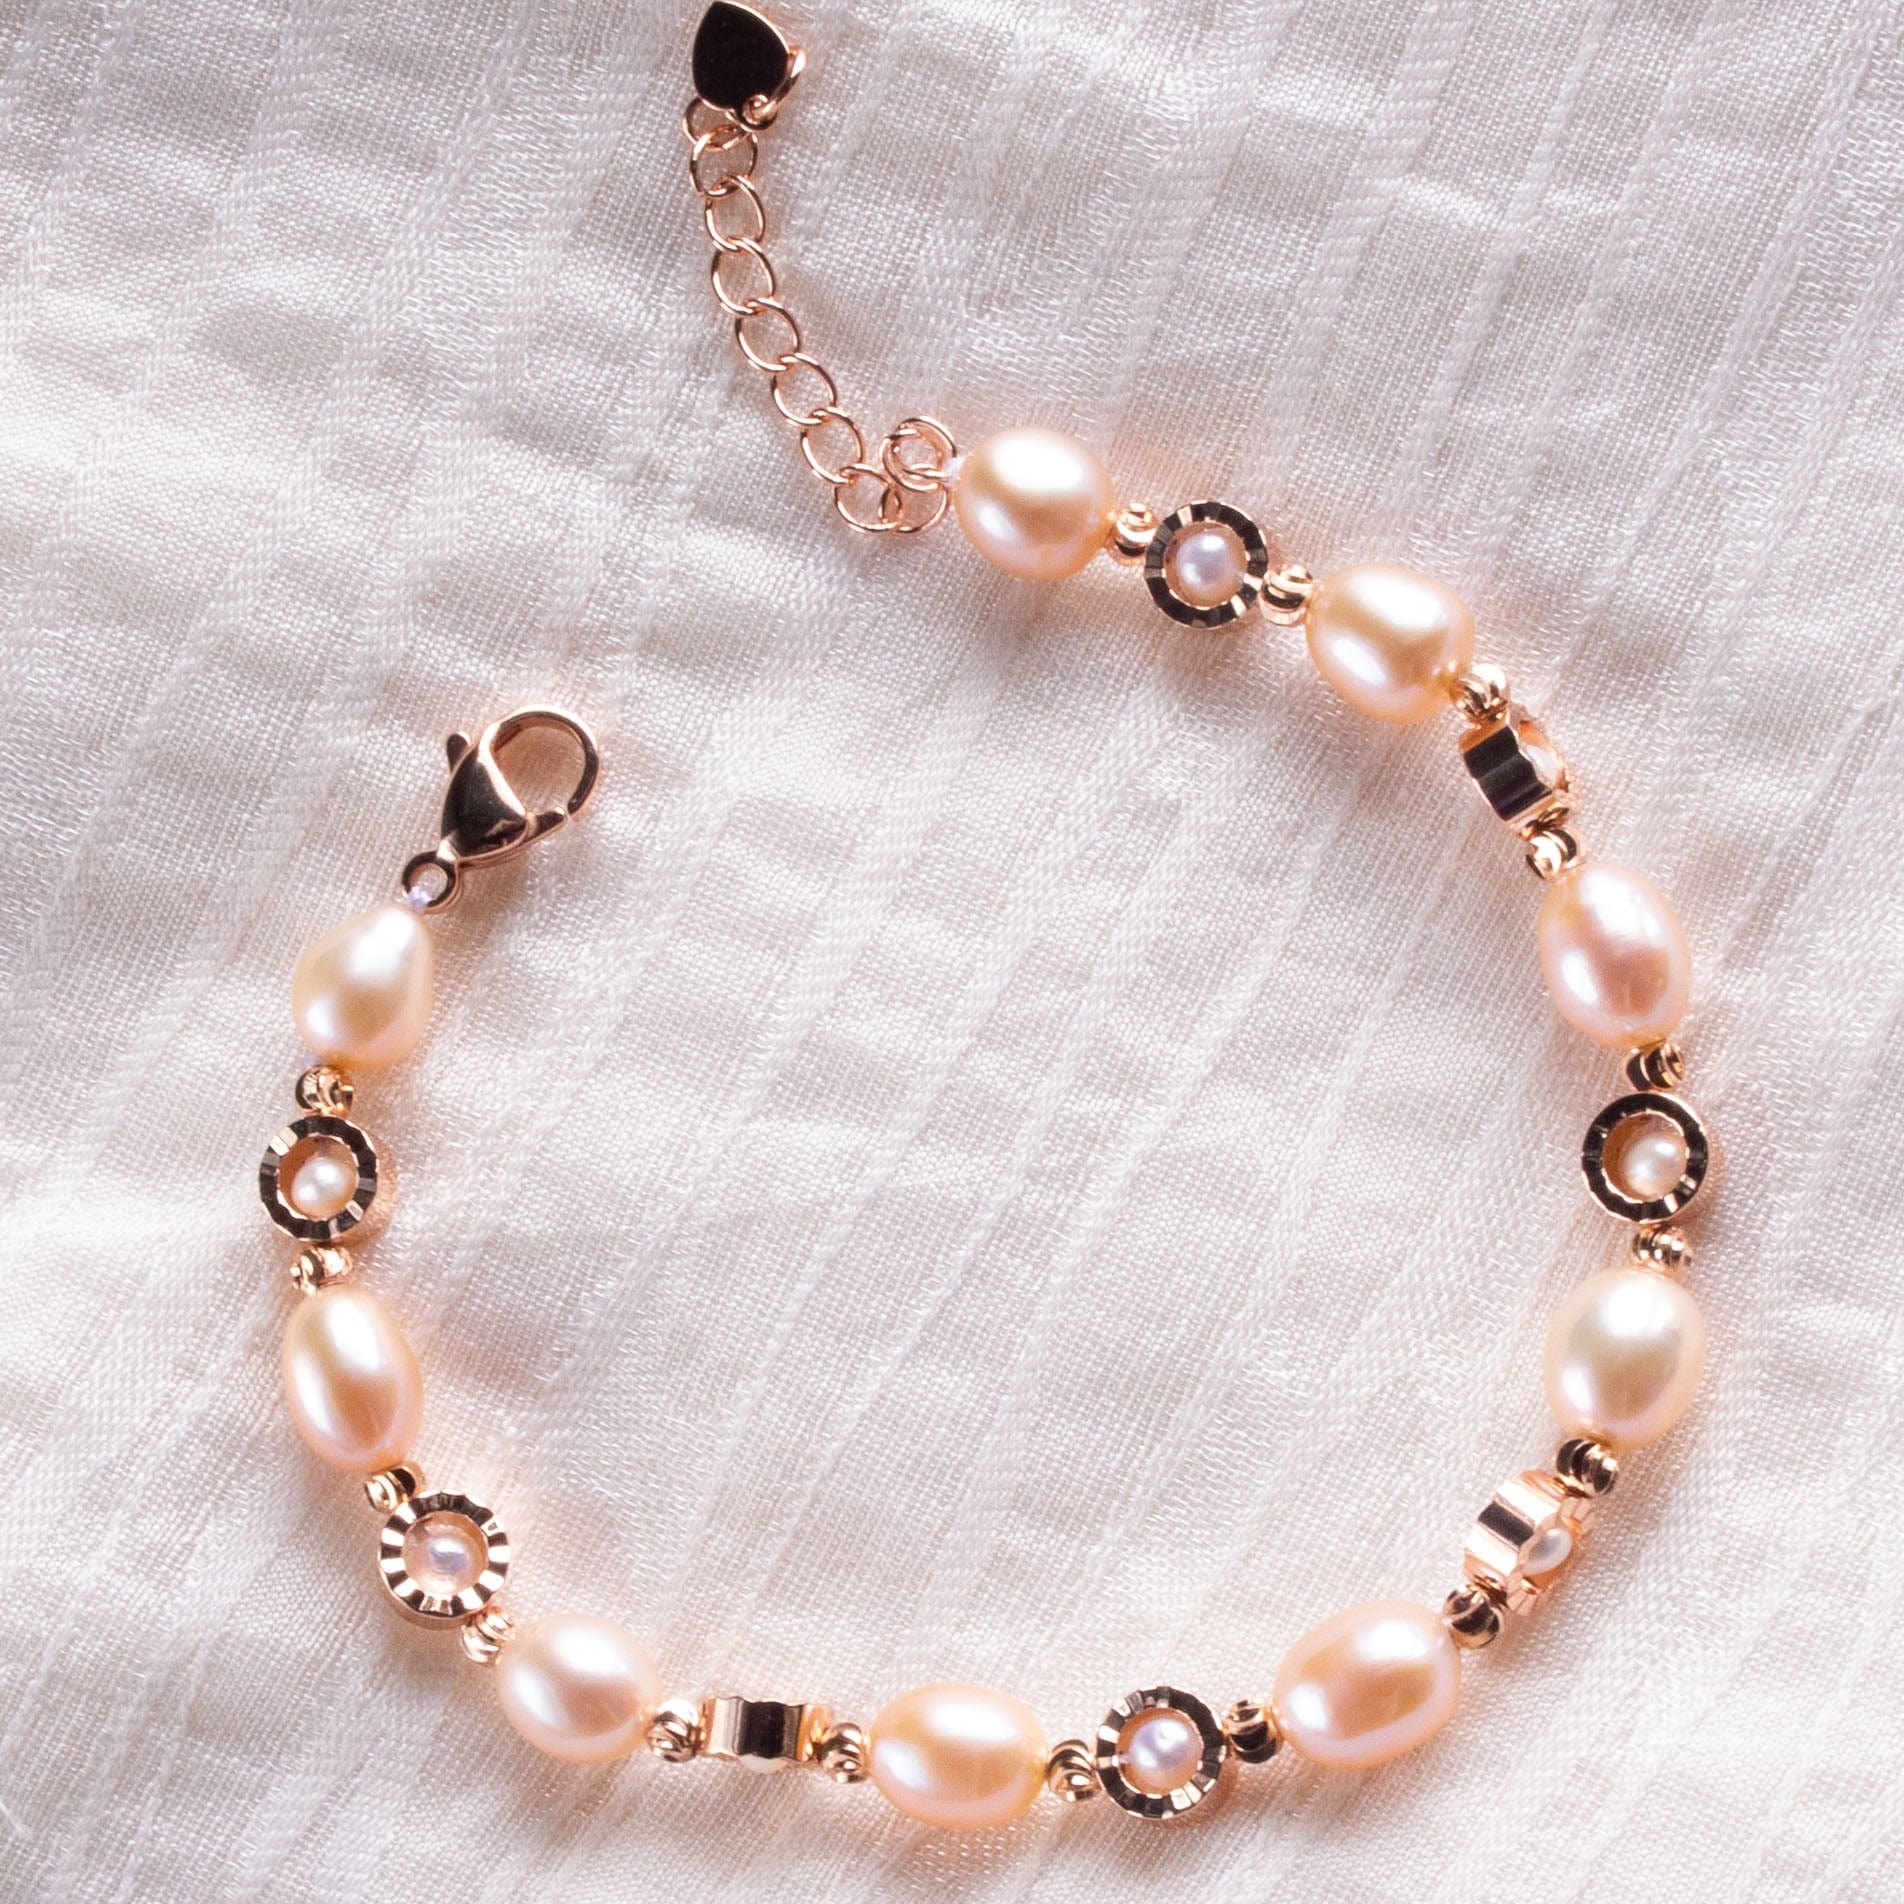 Arbor Trading Post Bracelets Handcrafted Pink Cultured Freshwater Baroque Pearl Bracelet with Rose Gold Finish Chain and Beads, 6mm x 8mm Pearl, 7.5 Inch Long